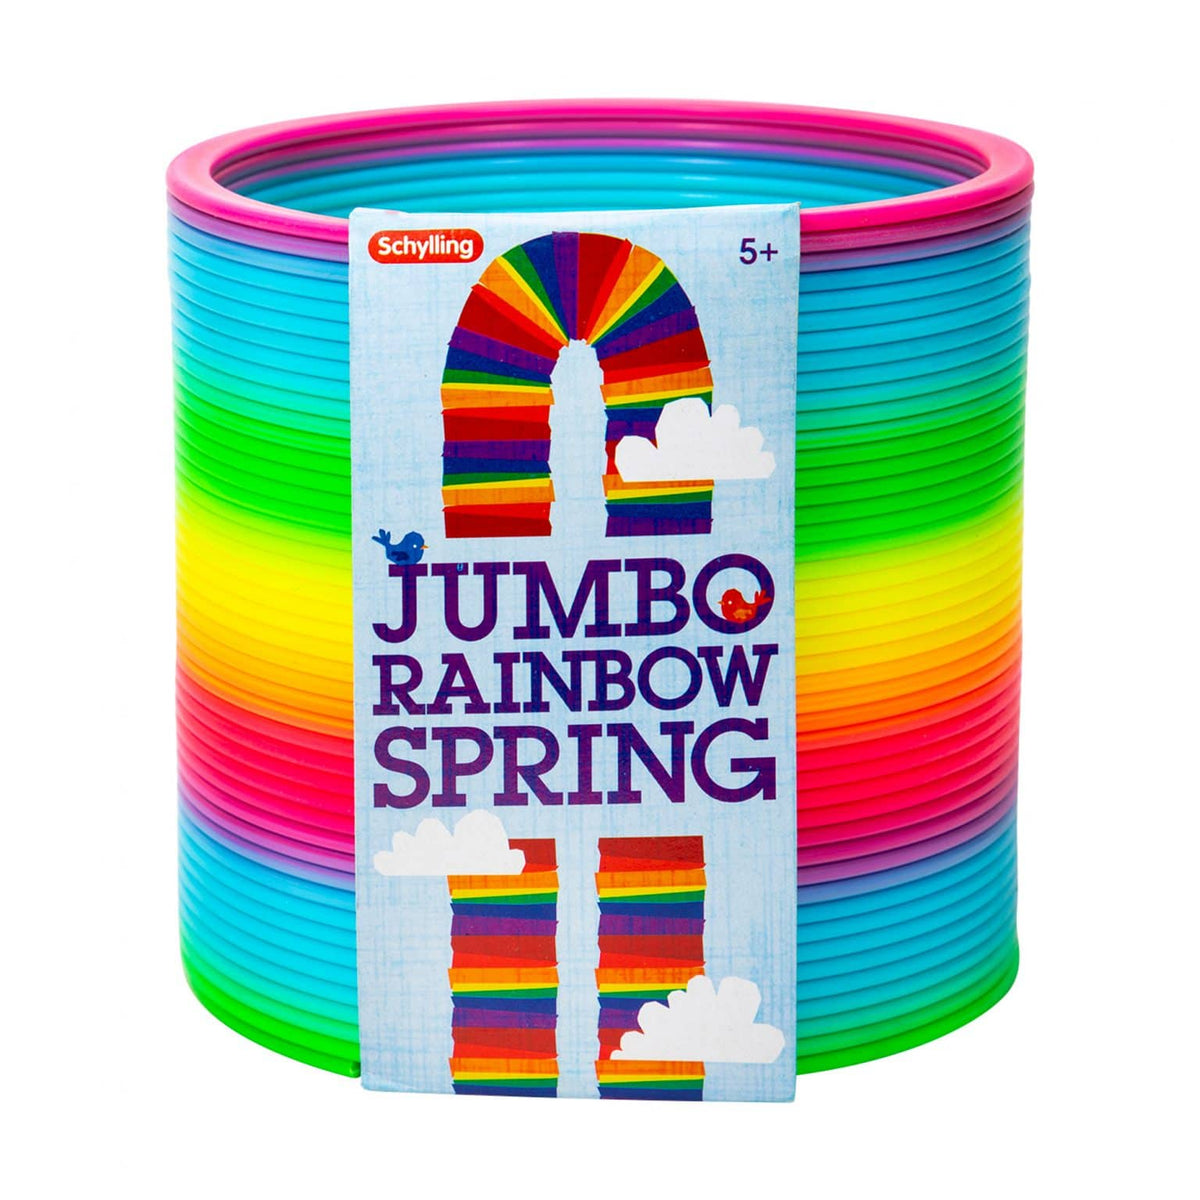 Front view of Jumbo Rainbow Spring in package upright.